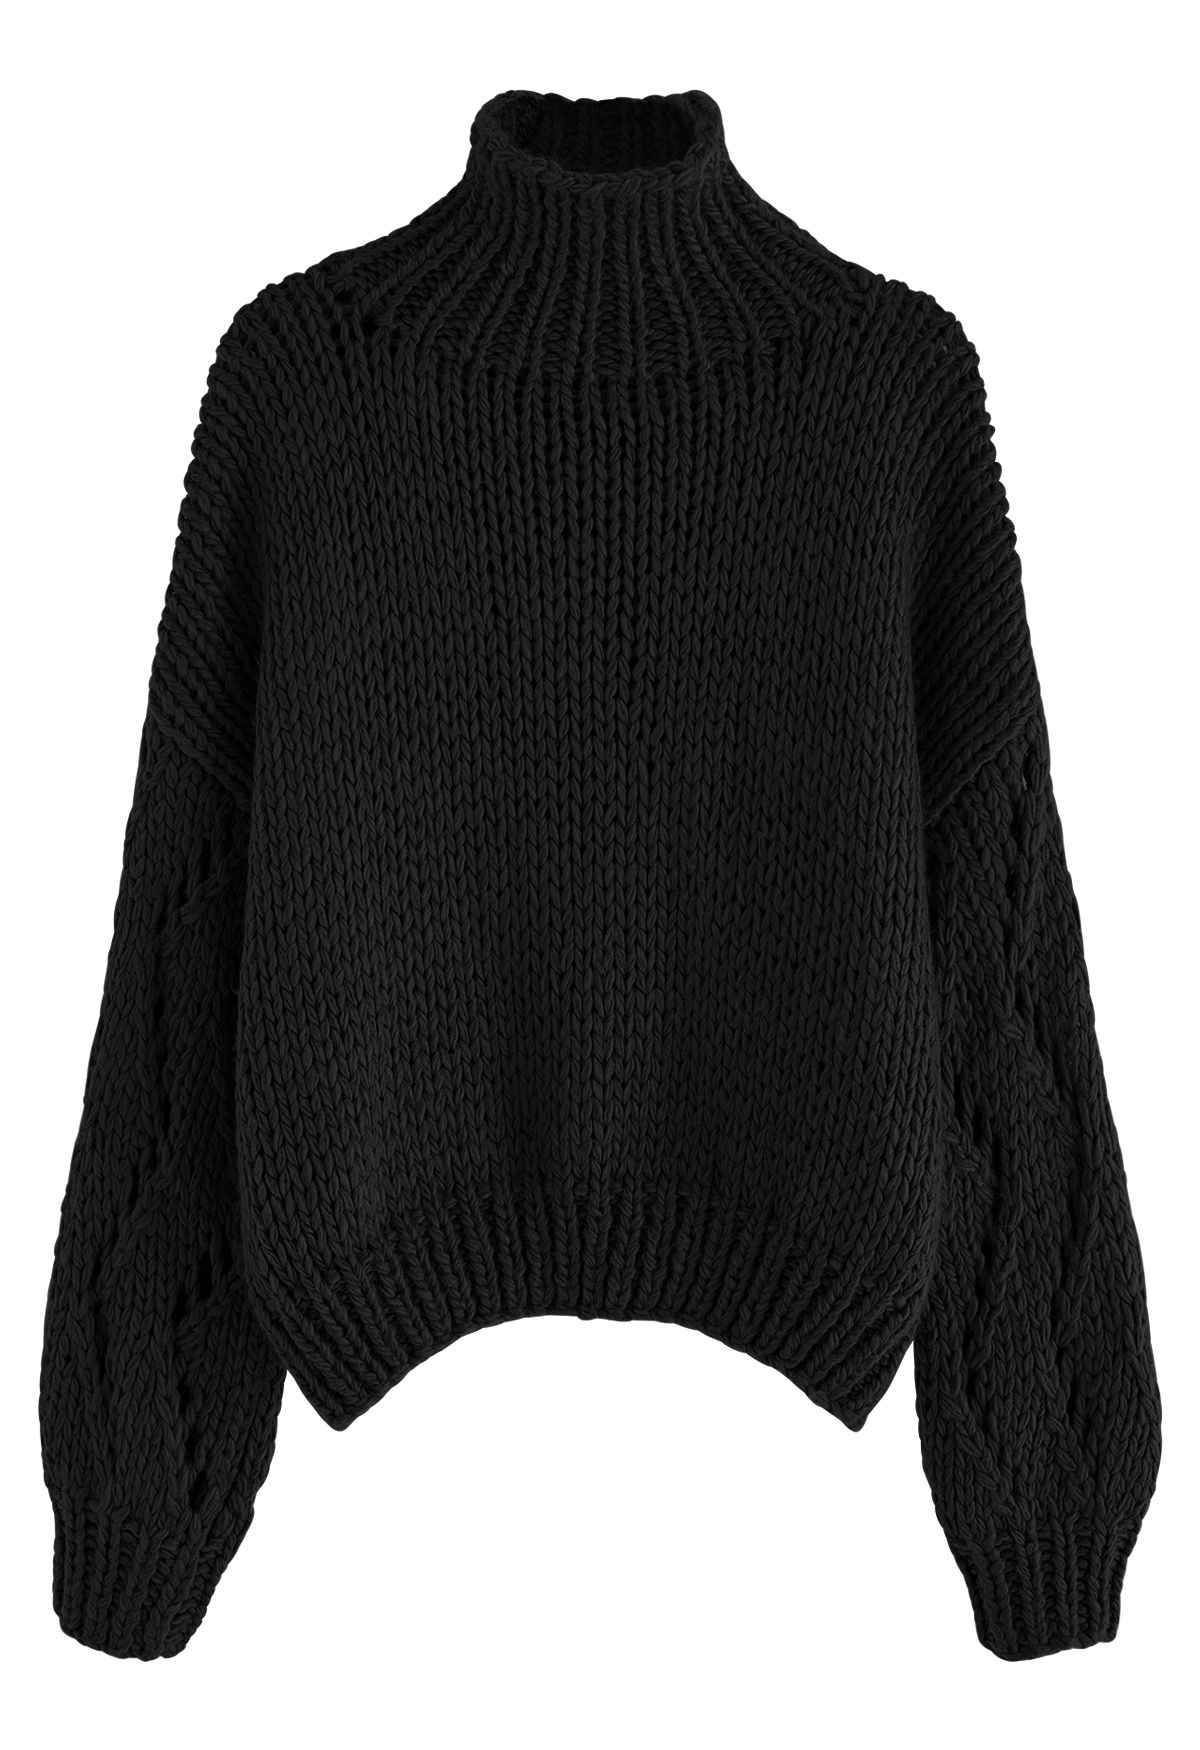 Pointelle Sleeve High Neck Hand-Knit Sweater in Black - Retro, Indie ...